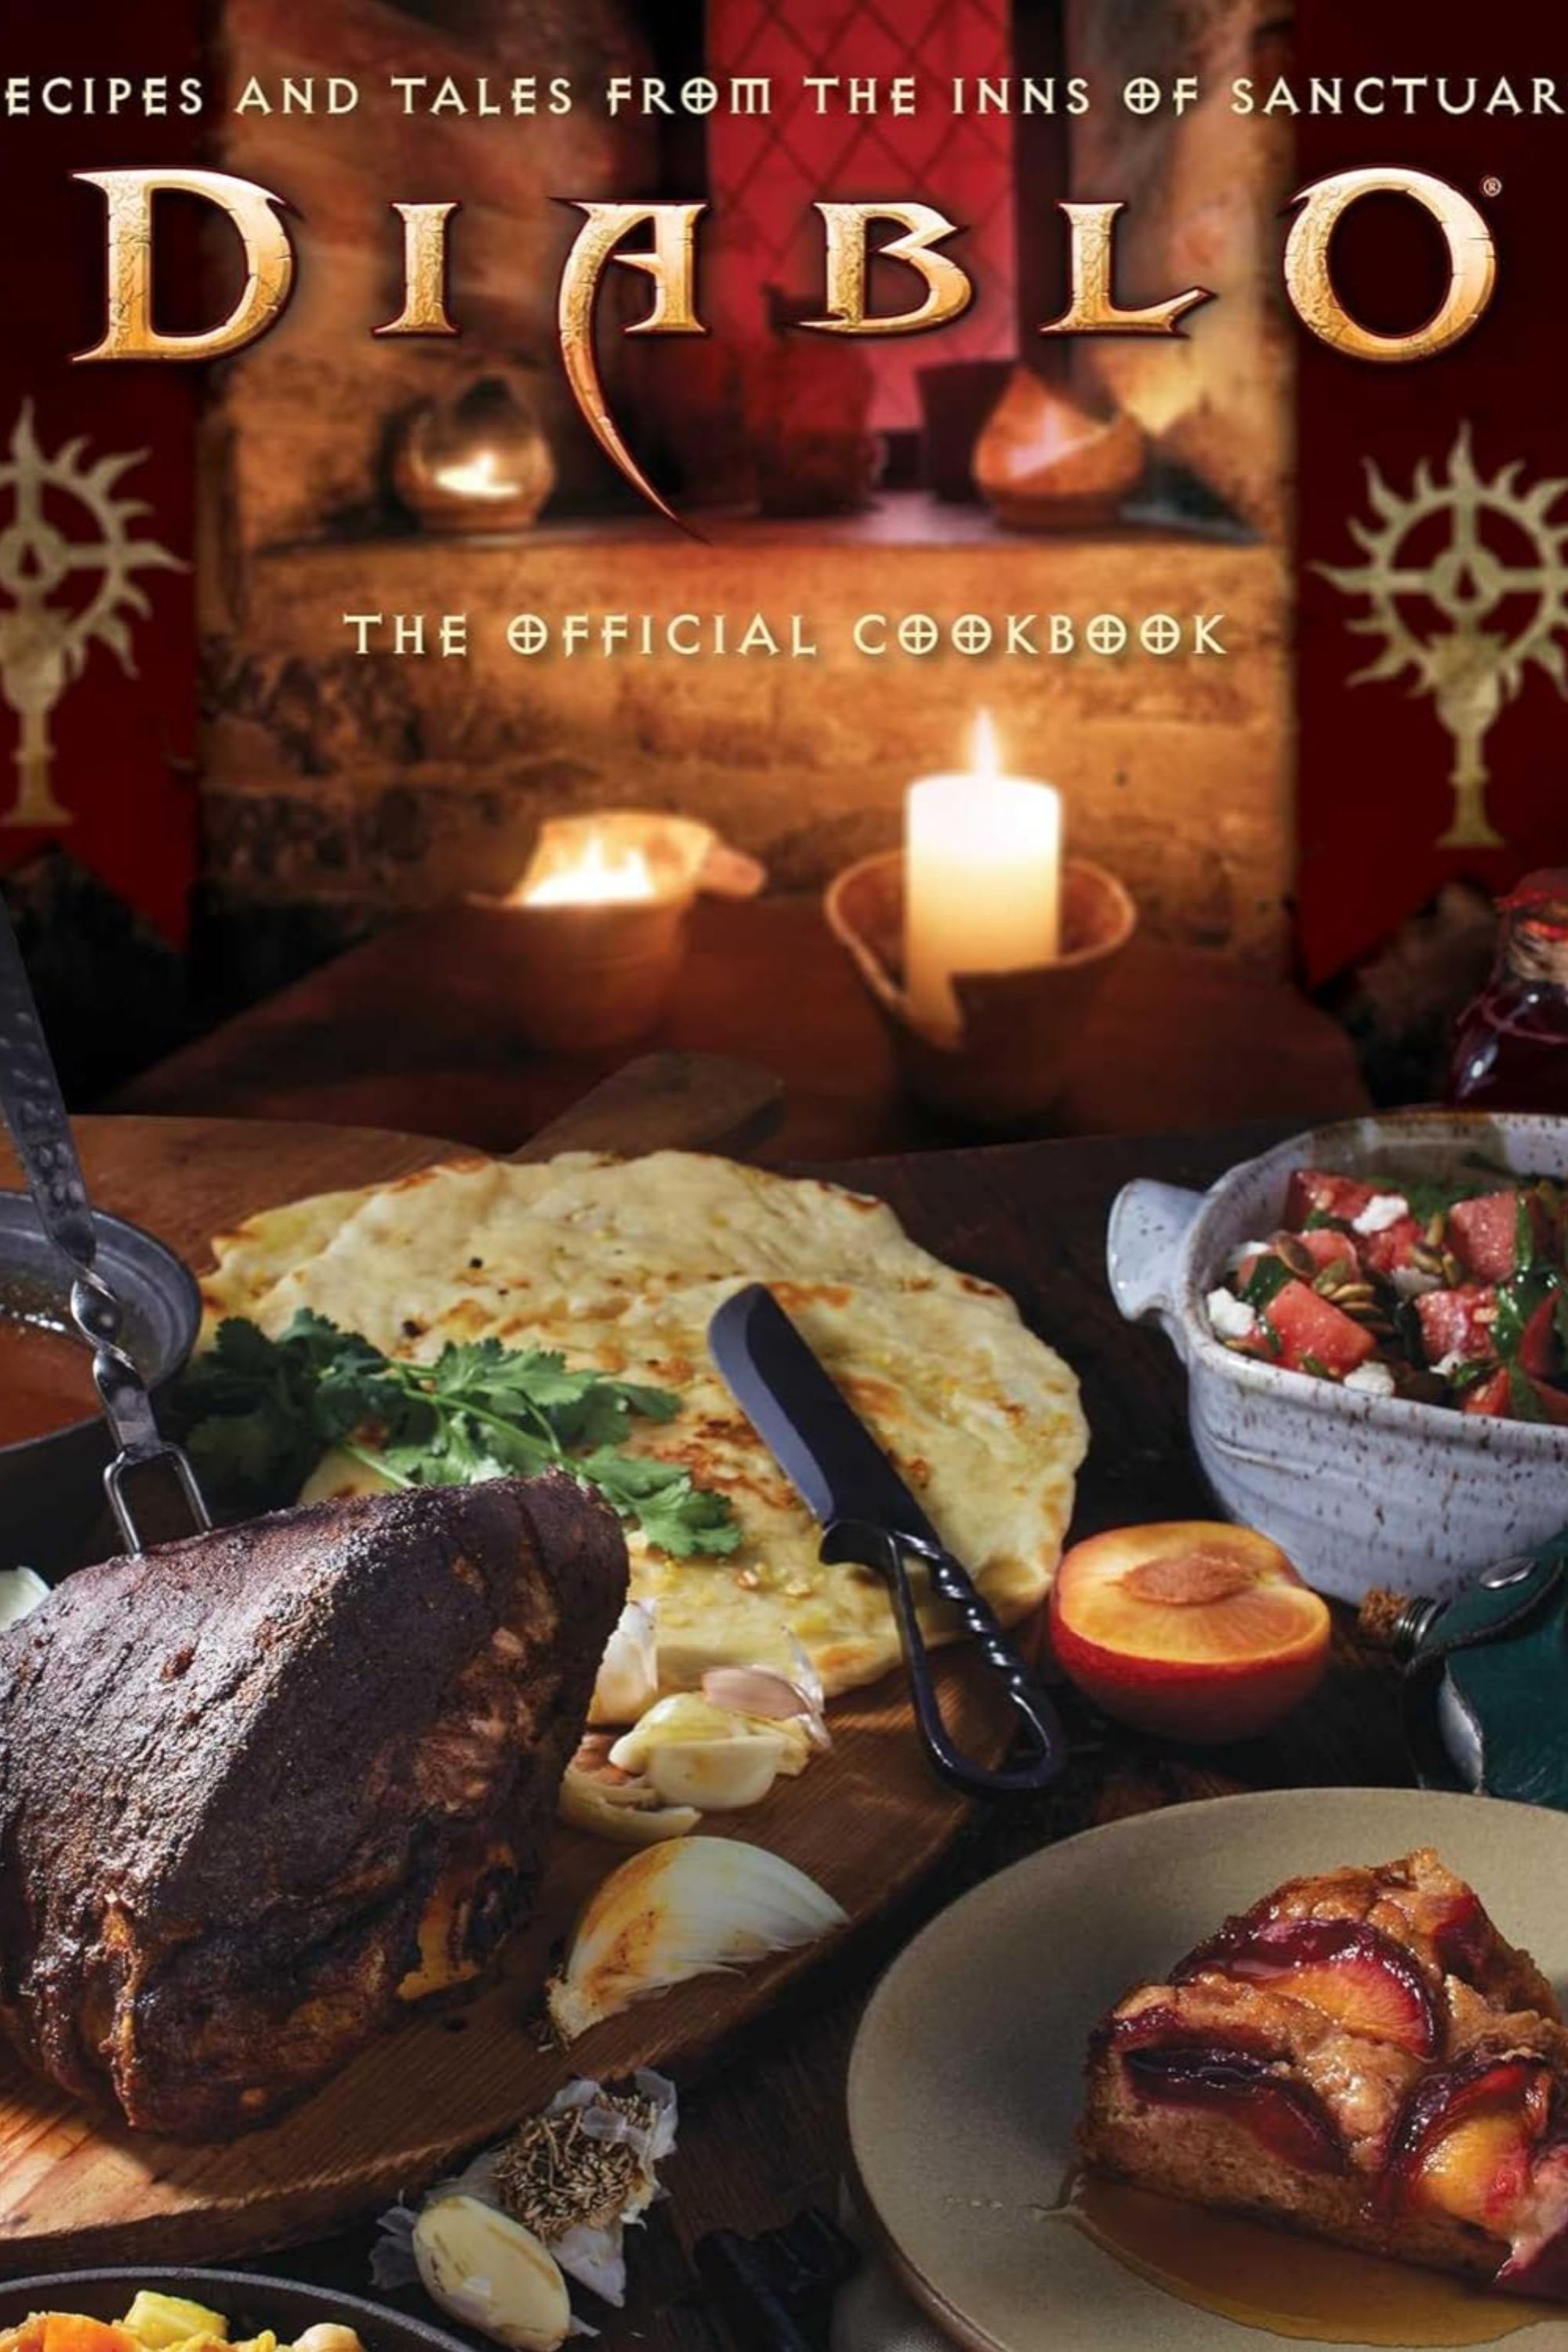 Diablo: The Official Cookbook: Recipes And Tales From The Inns Of Sanctuary